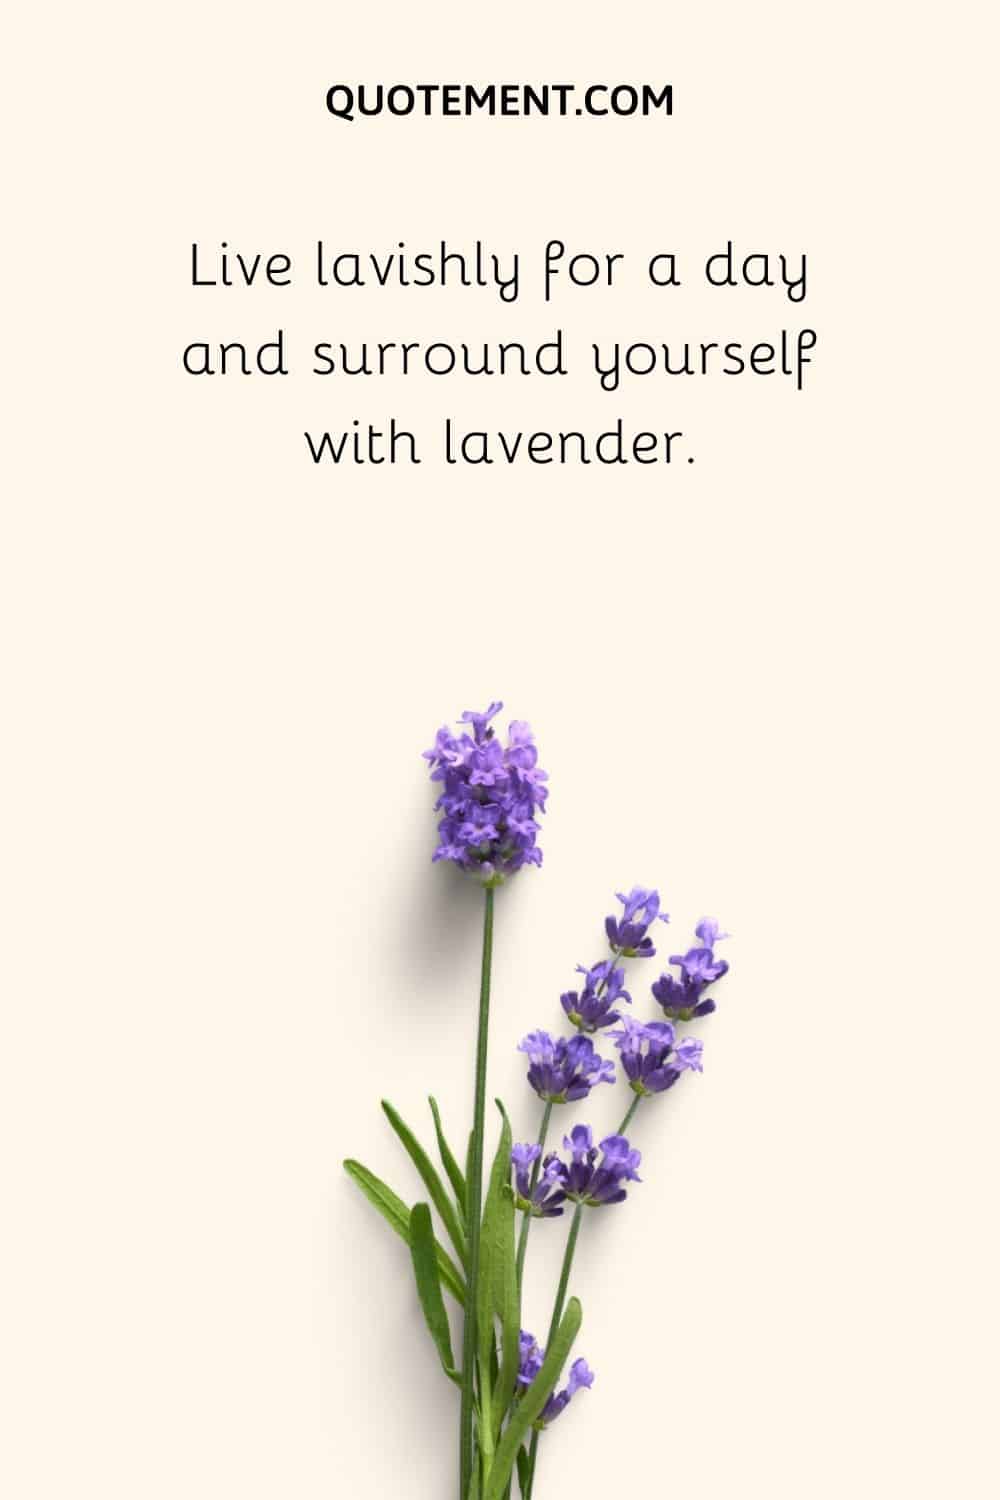 Live lavishly for a day and surround yourself with lavender